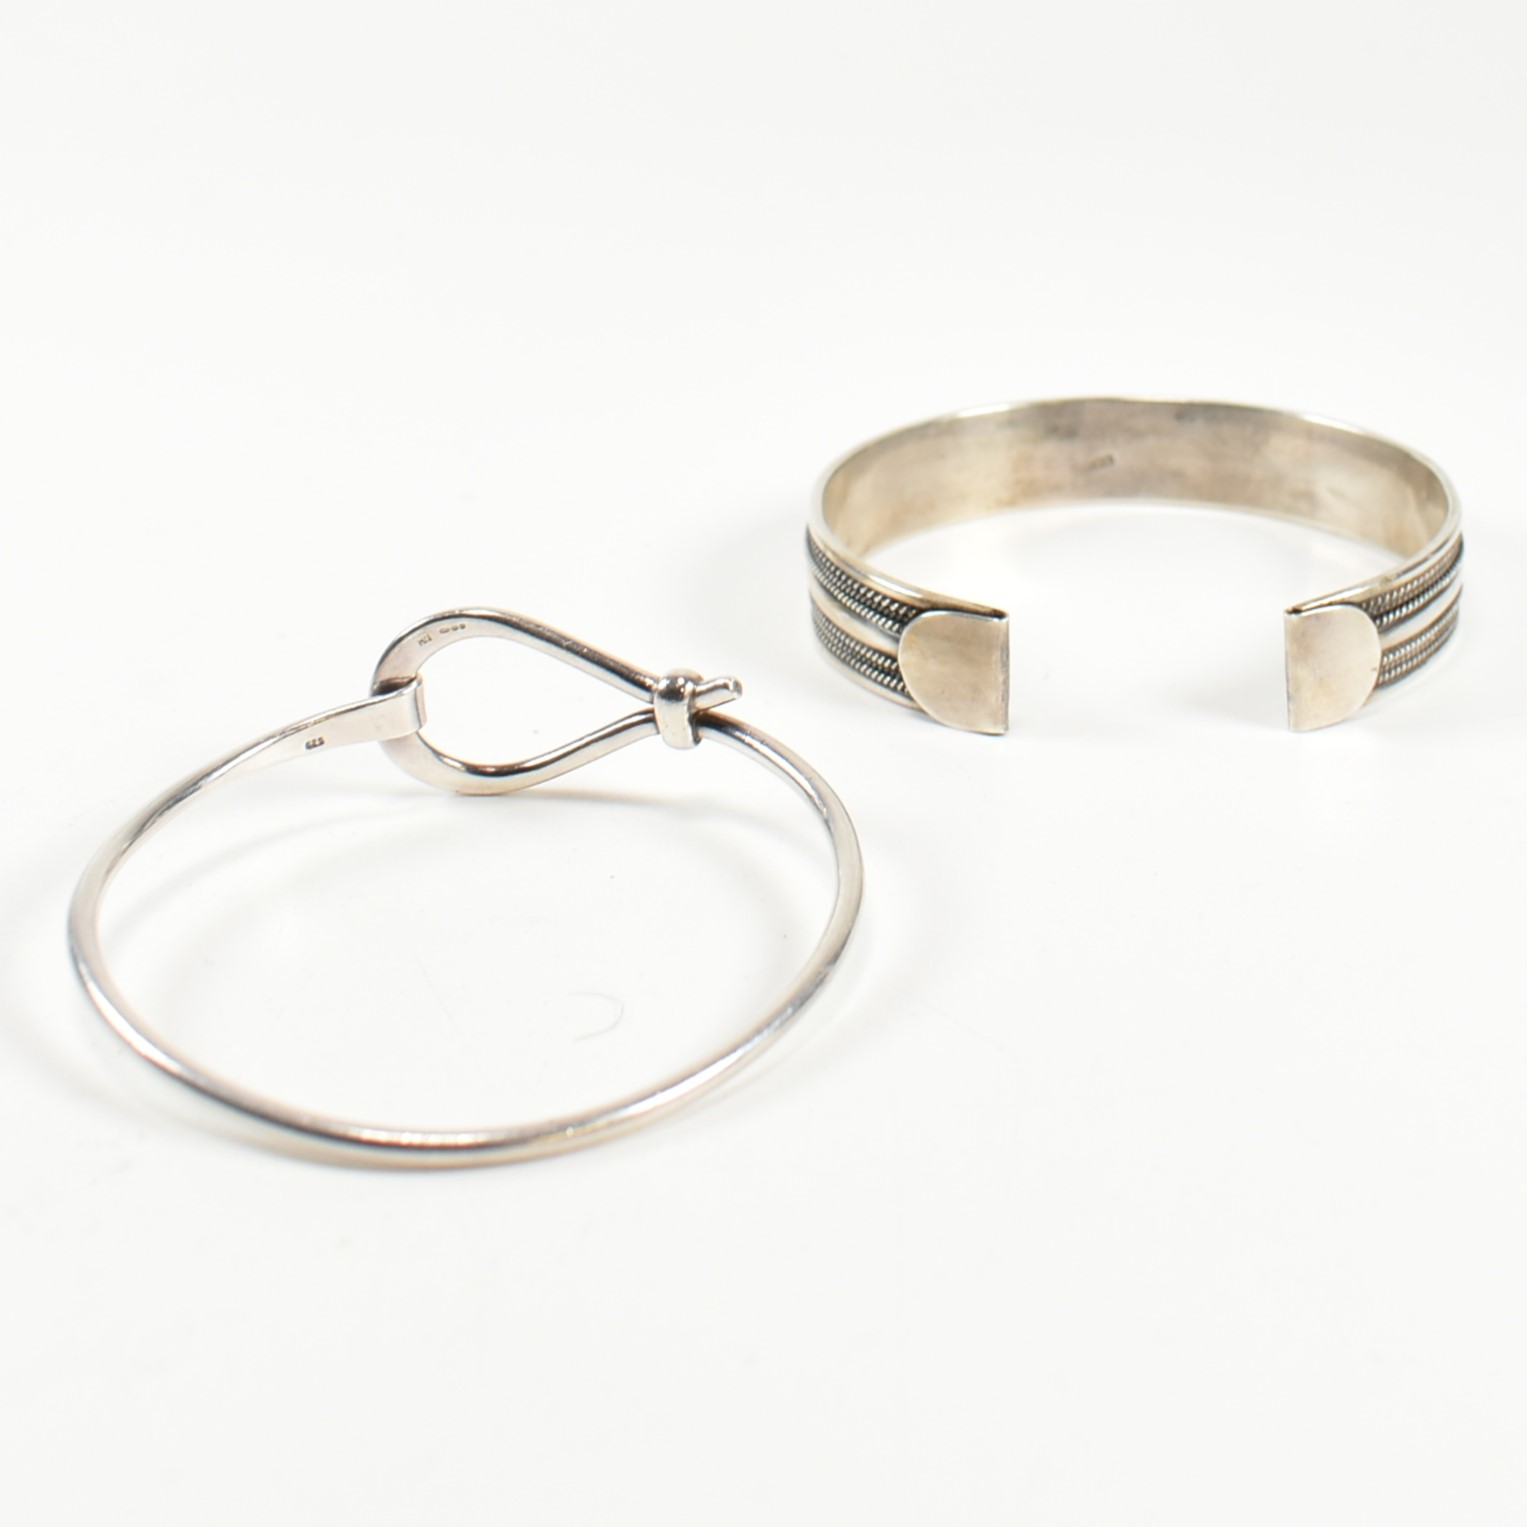 TWO SILVER BANGLES - Image 2 of 6